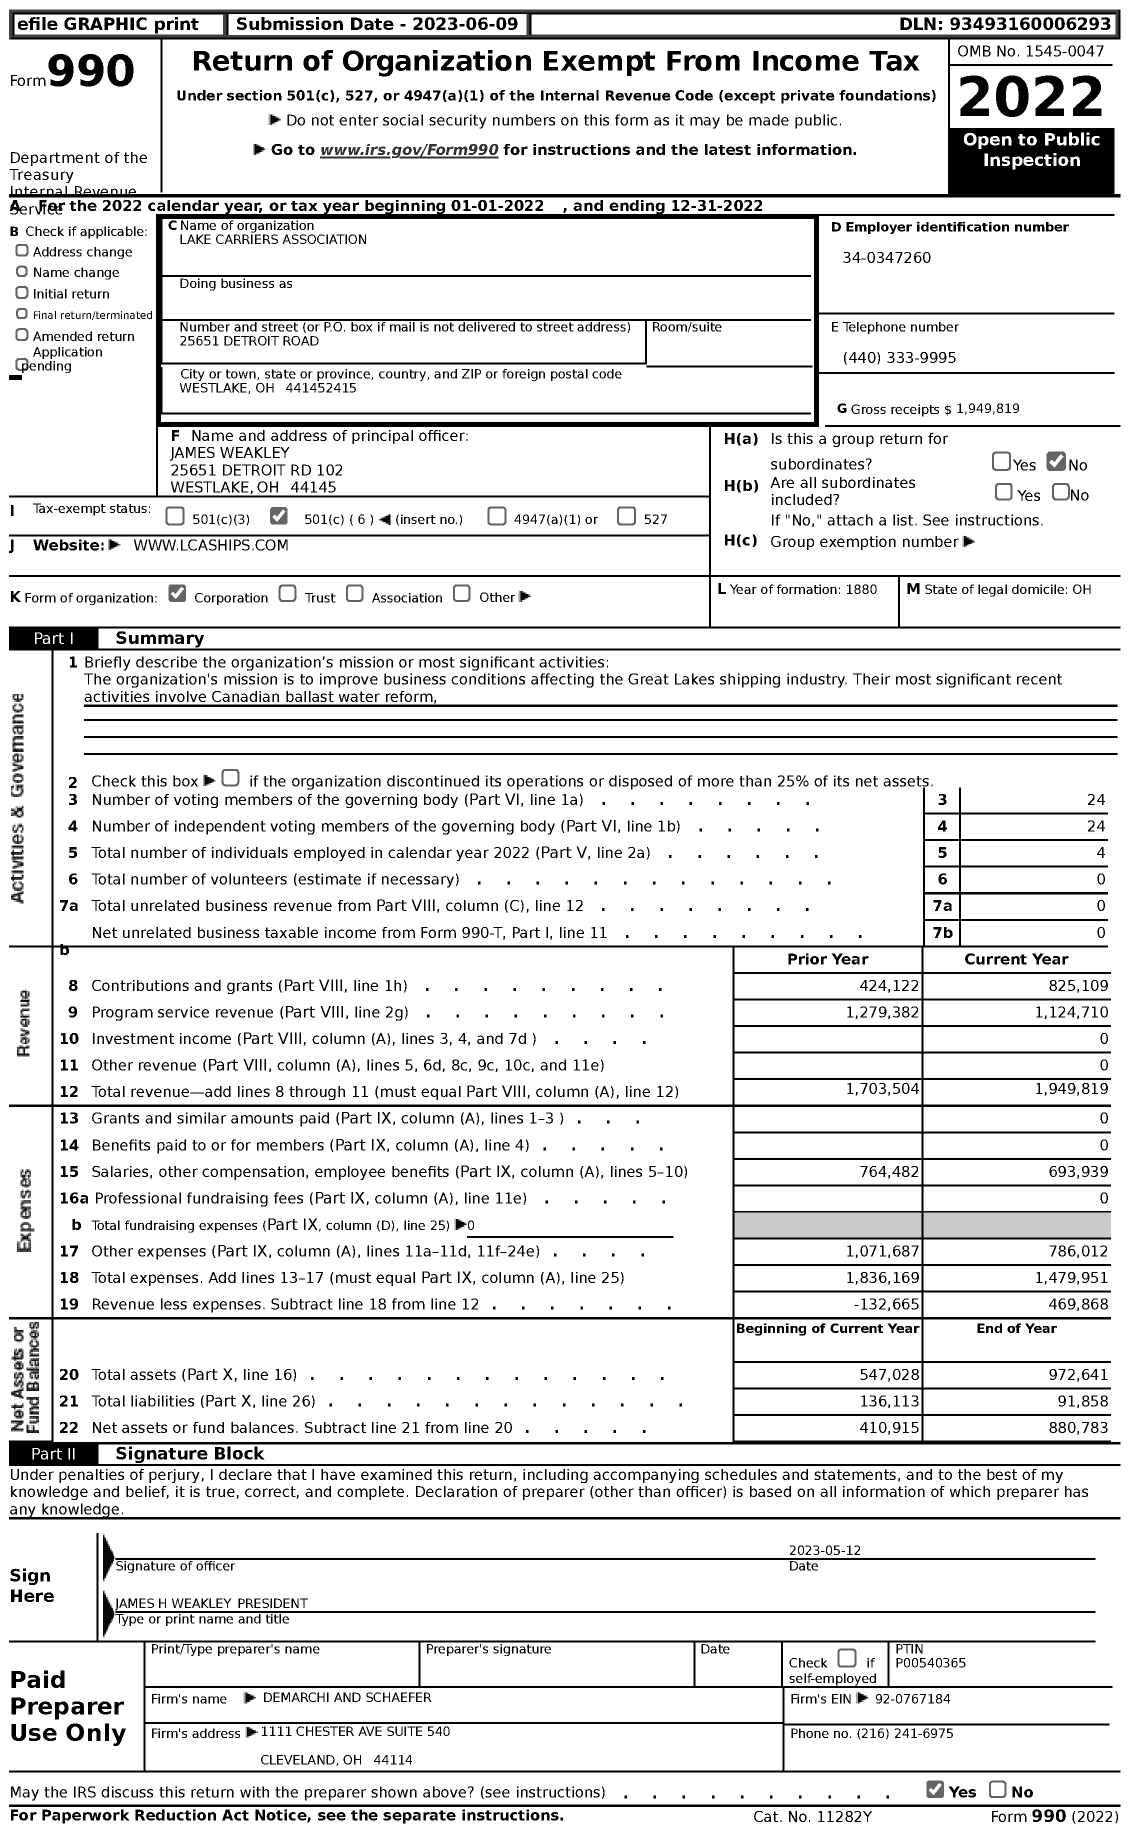 Image of first page of 2022 Form 990 for Lake Carriers Association (LCA)